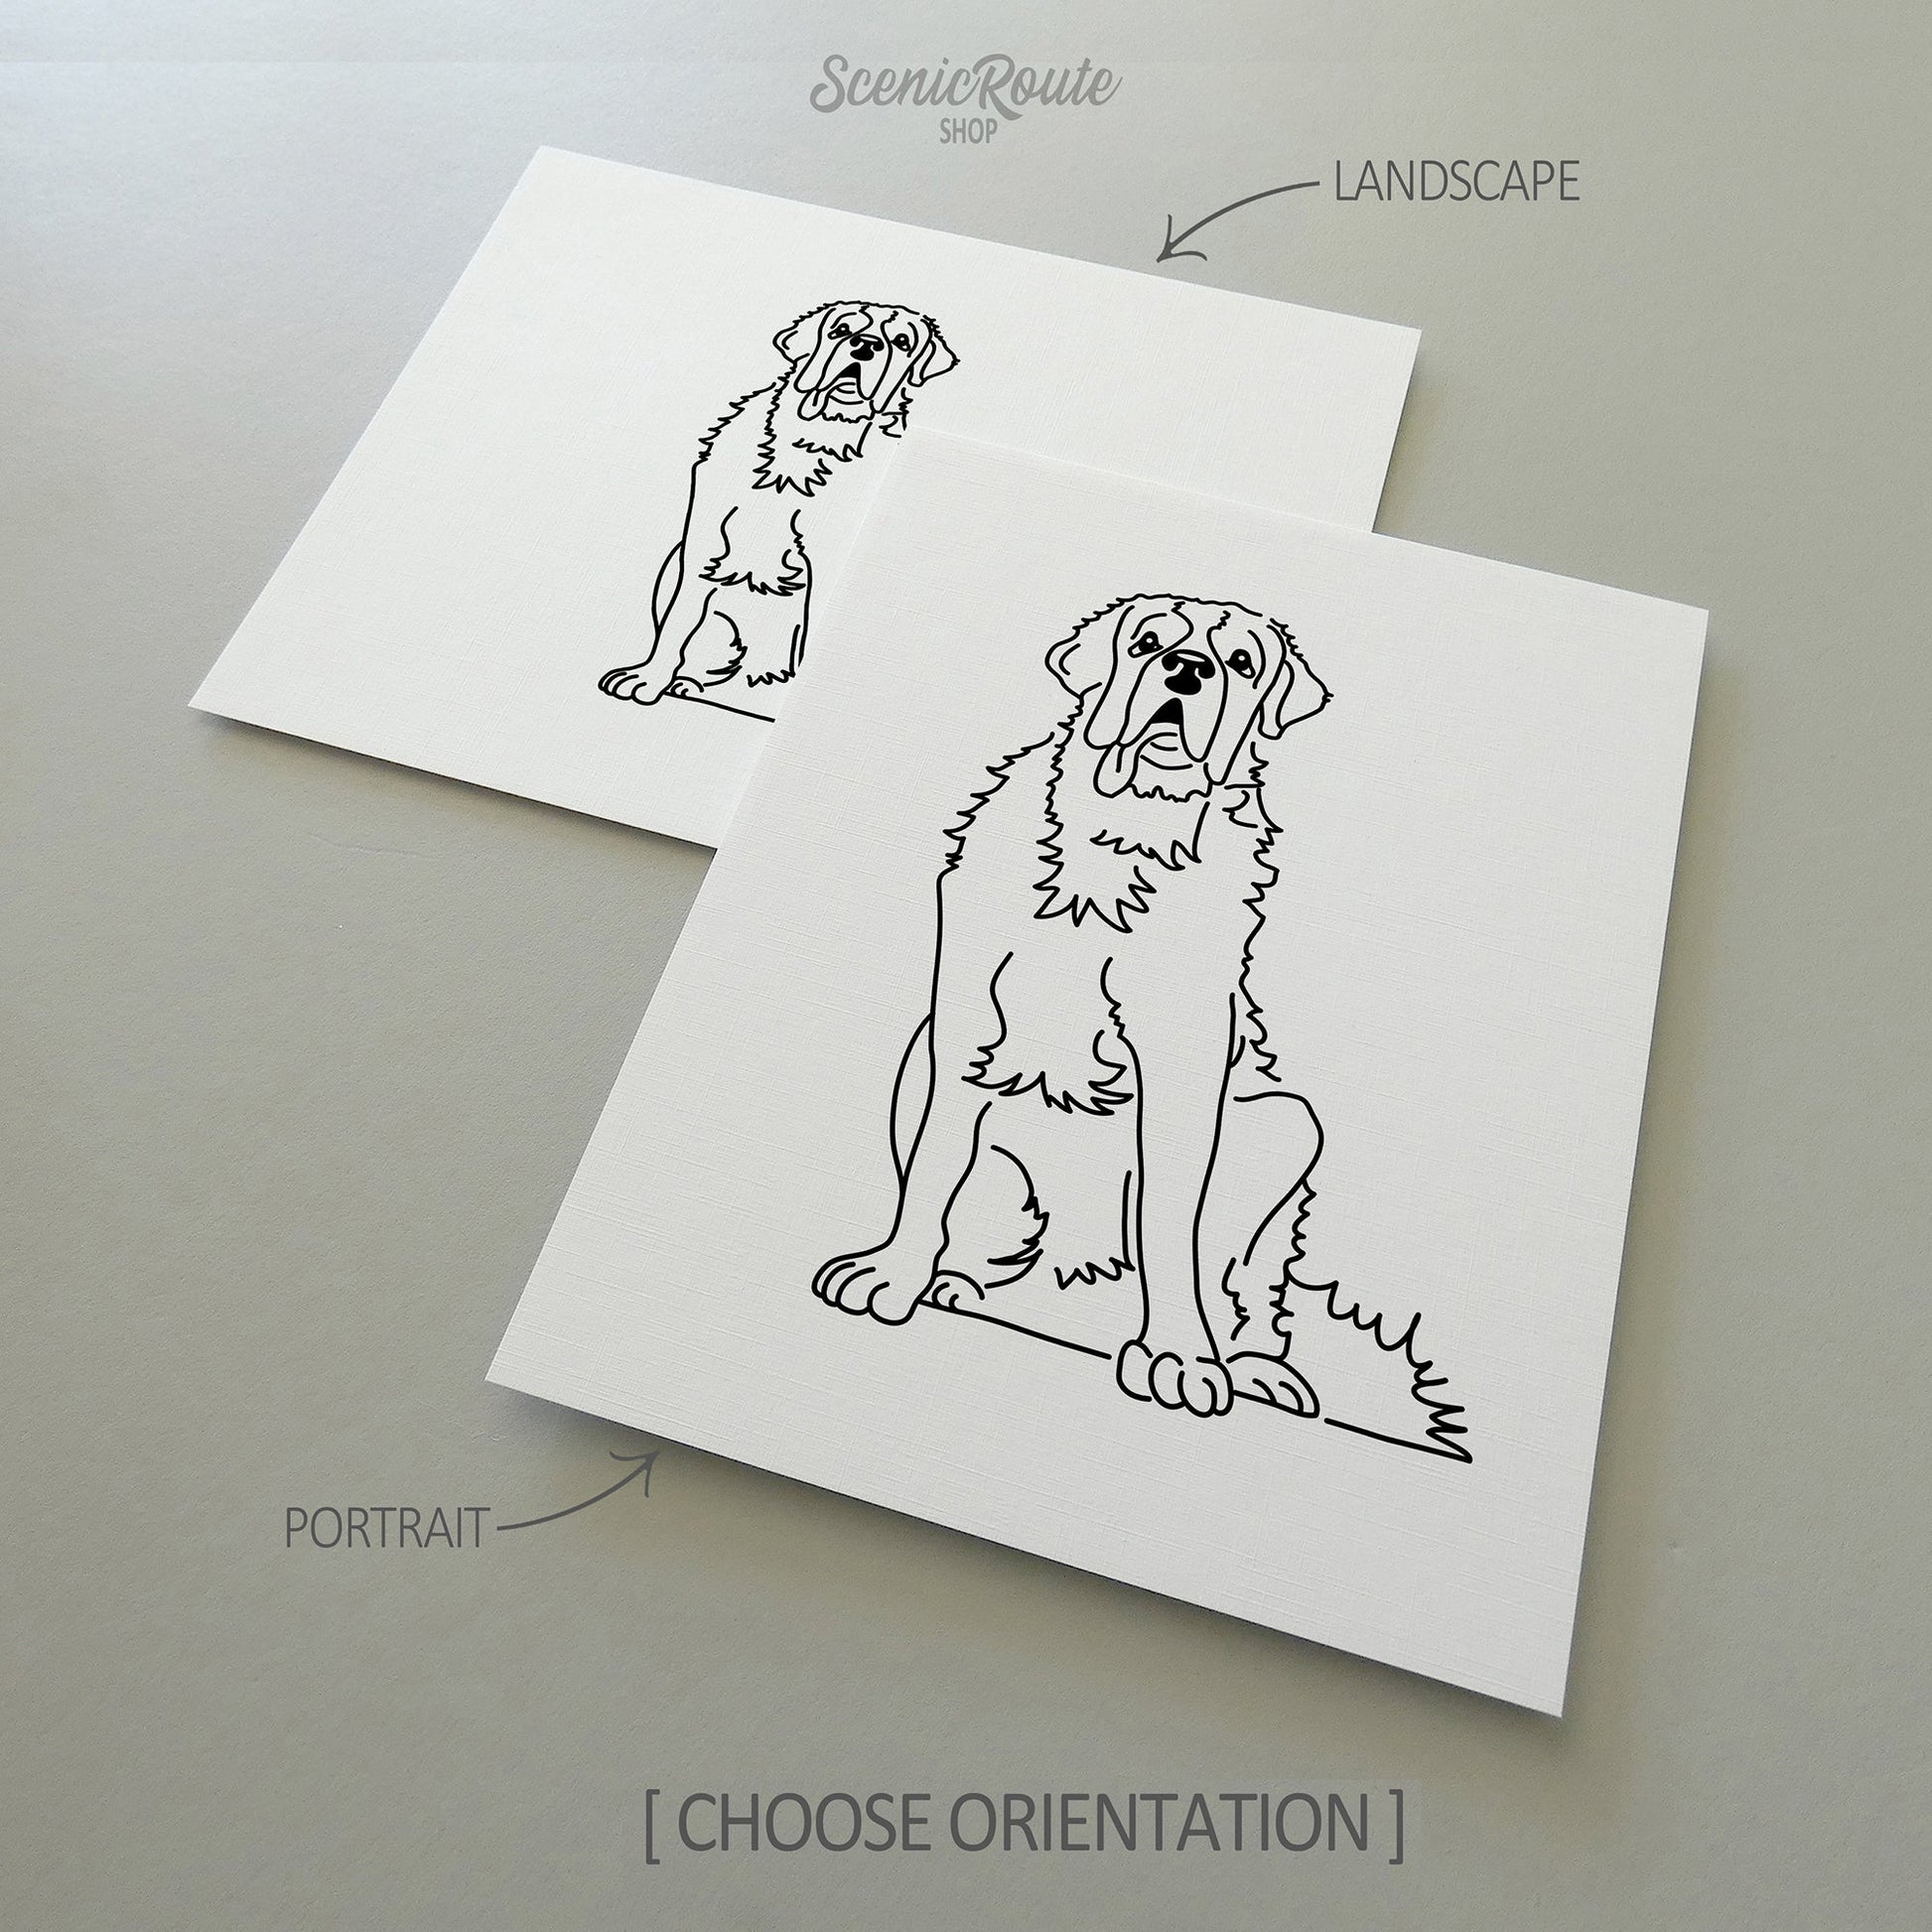 Two line art drawings of a Saint Bernard dog on white linen paper with a gray background.  The pieces are shown in portrait and landscape orientation for the available art print options.